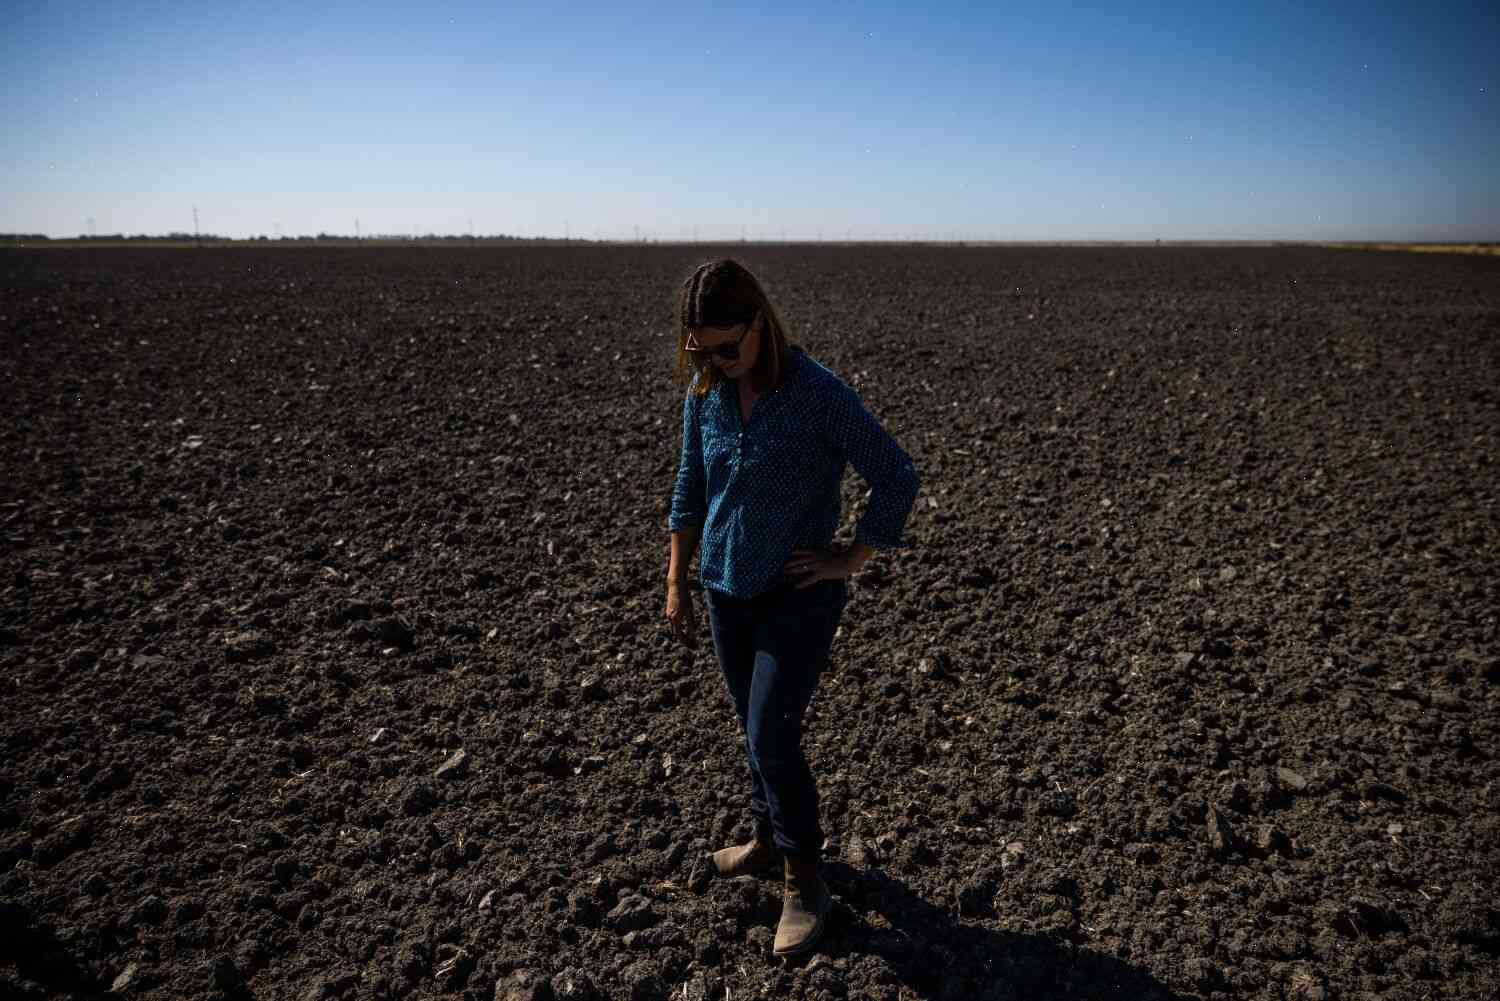 California's drought is causing farmers to go broke